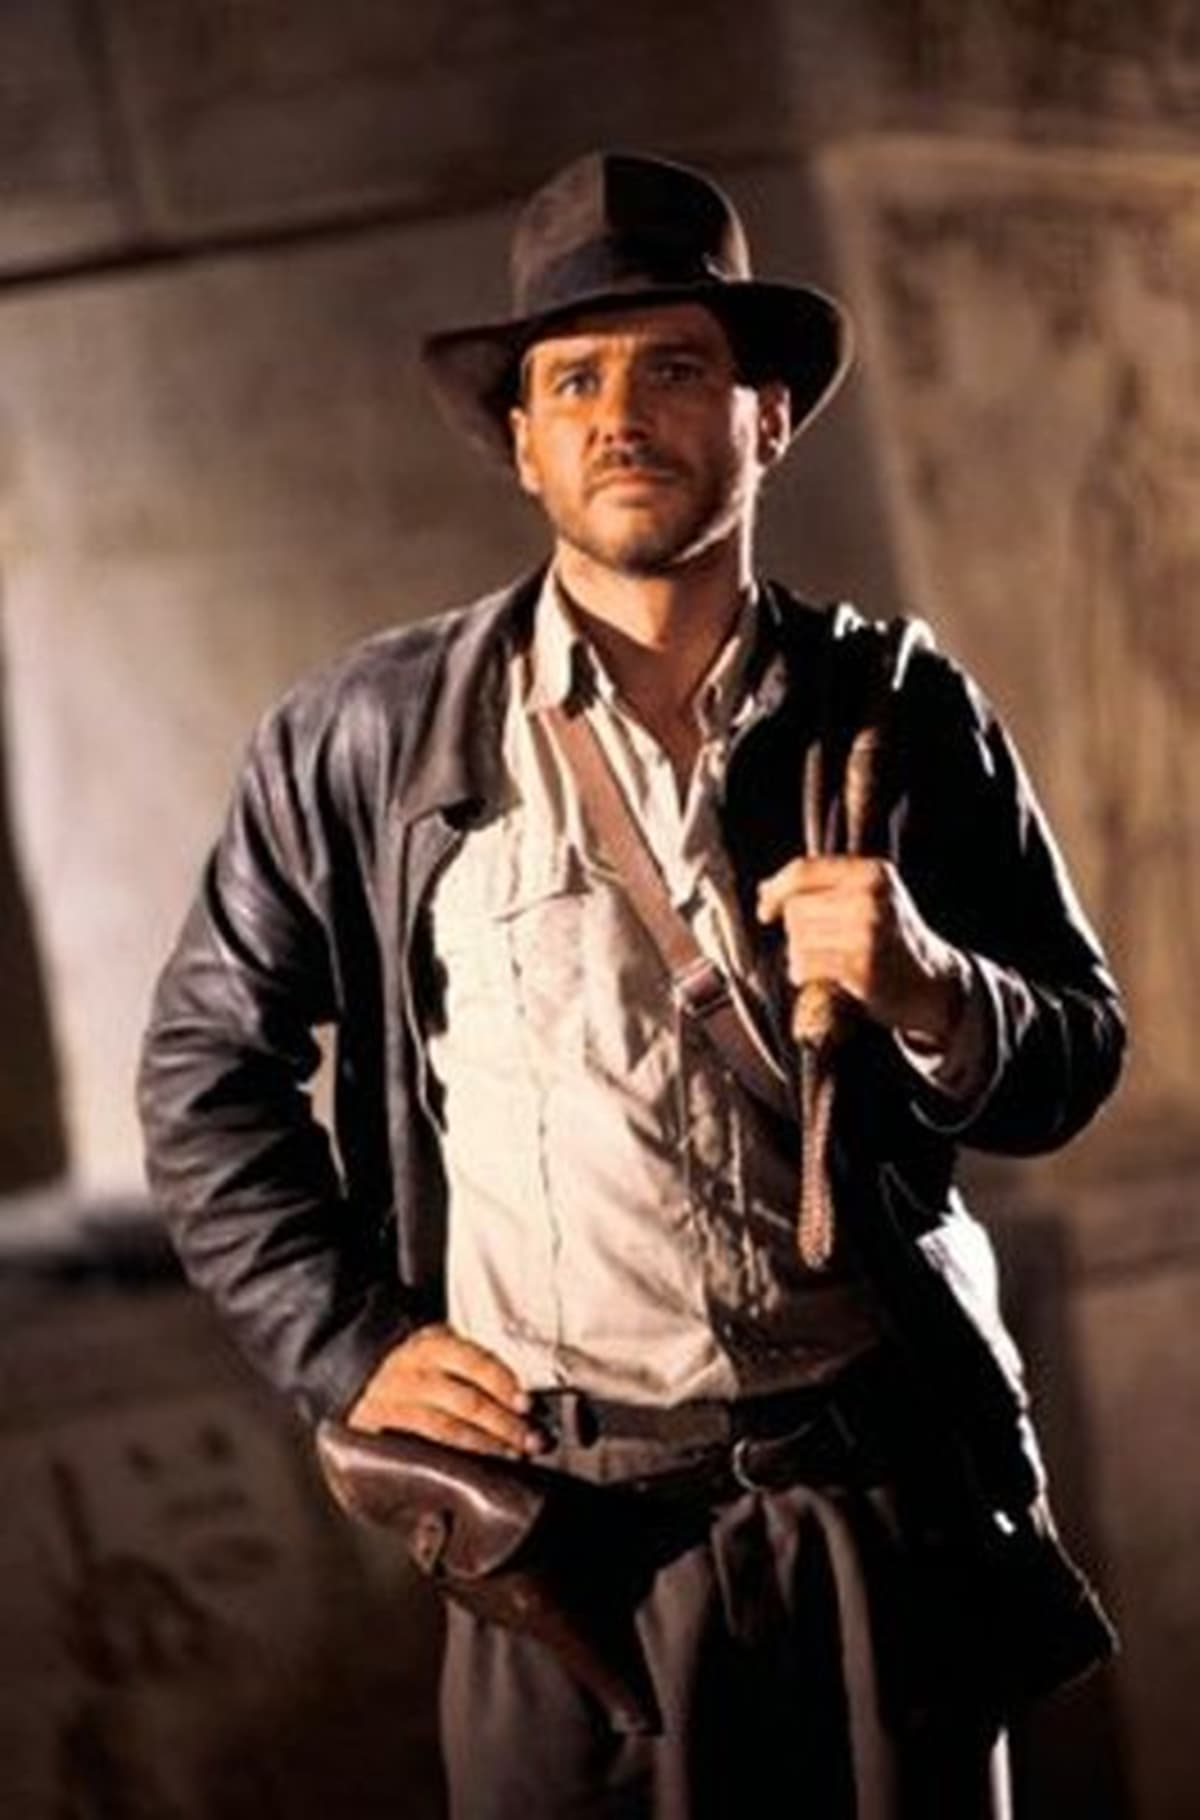 Harrison Ford wears a brown leather jacket as Indiana Jones in the 1981 American action-adventure film Raiders of the Lost Ark